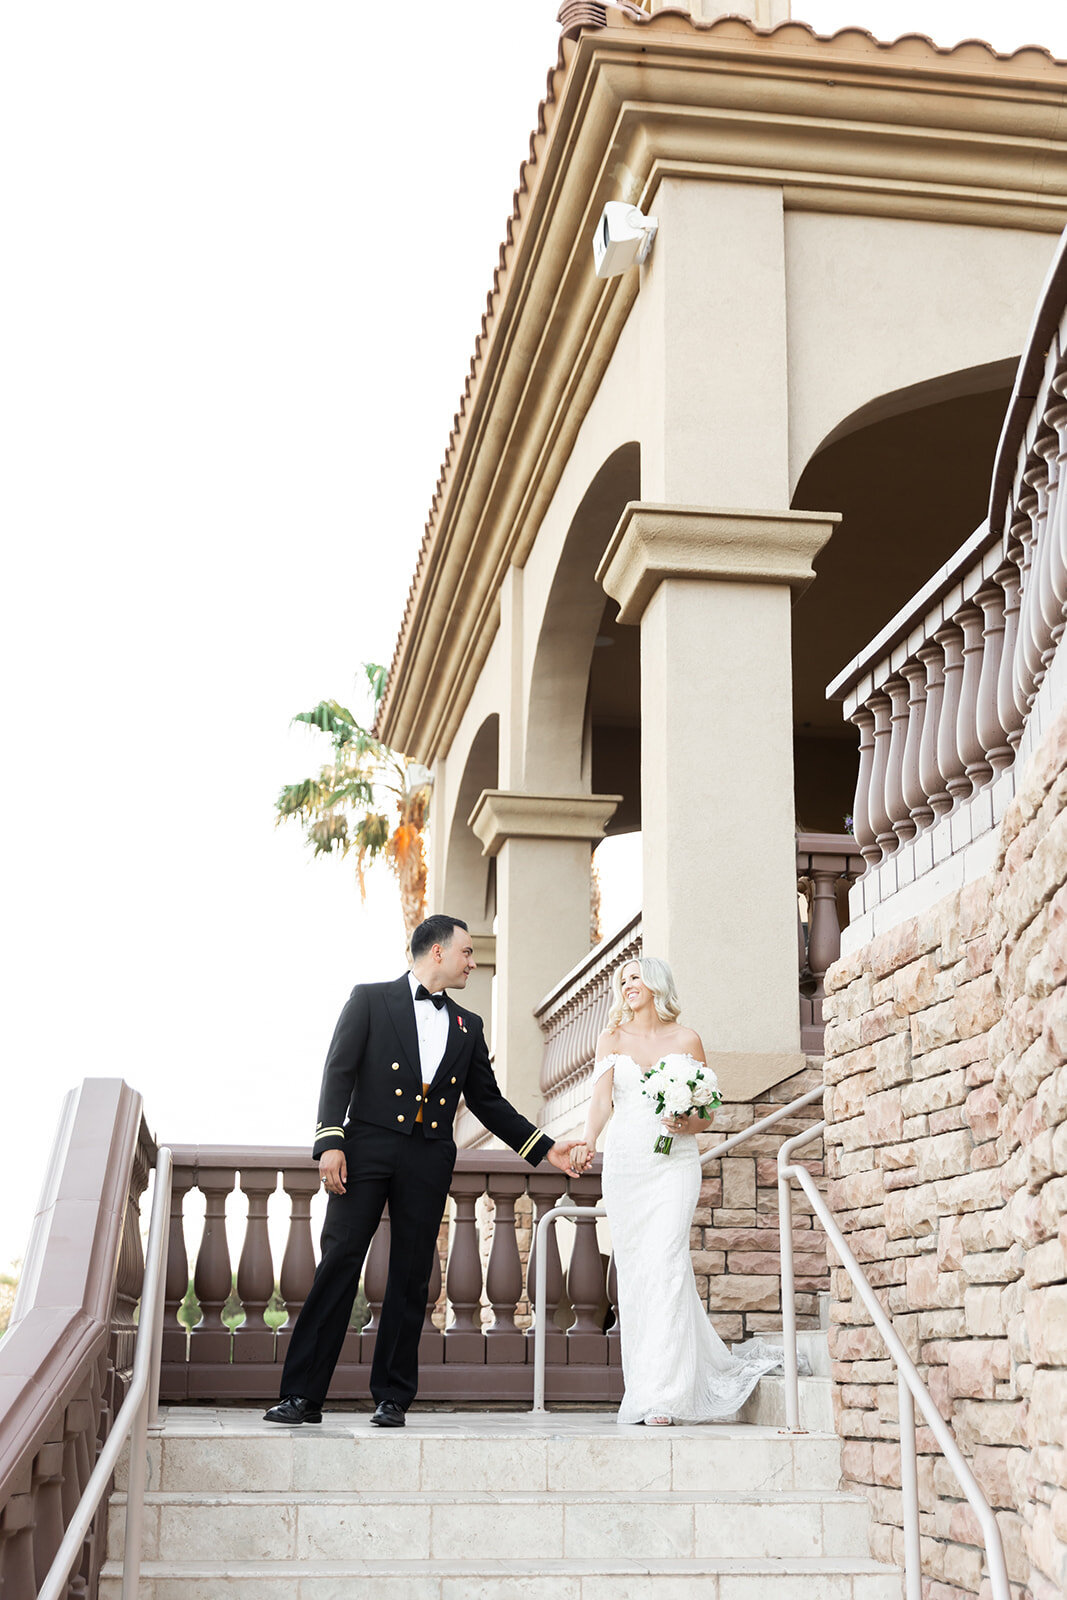 Karlie Colleen Photography - Holly & Ronnie Wedding - Seville Country Club - Gilbert Arizona-796